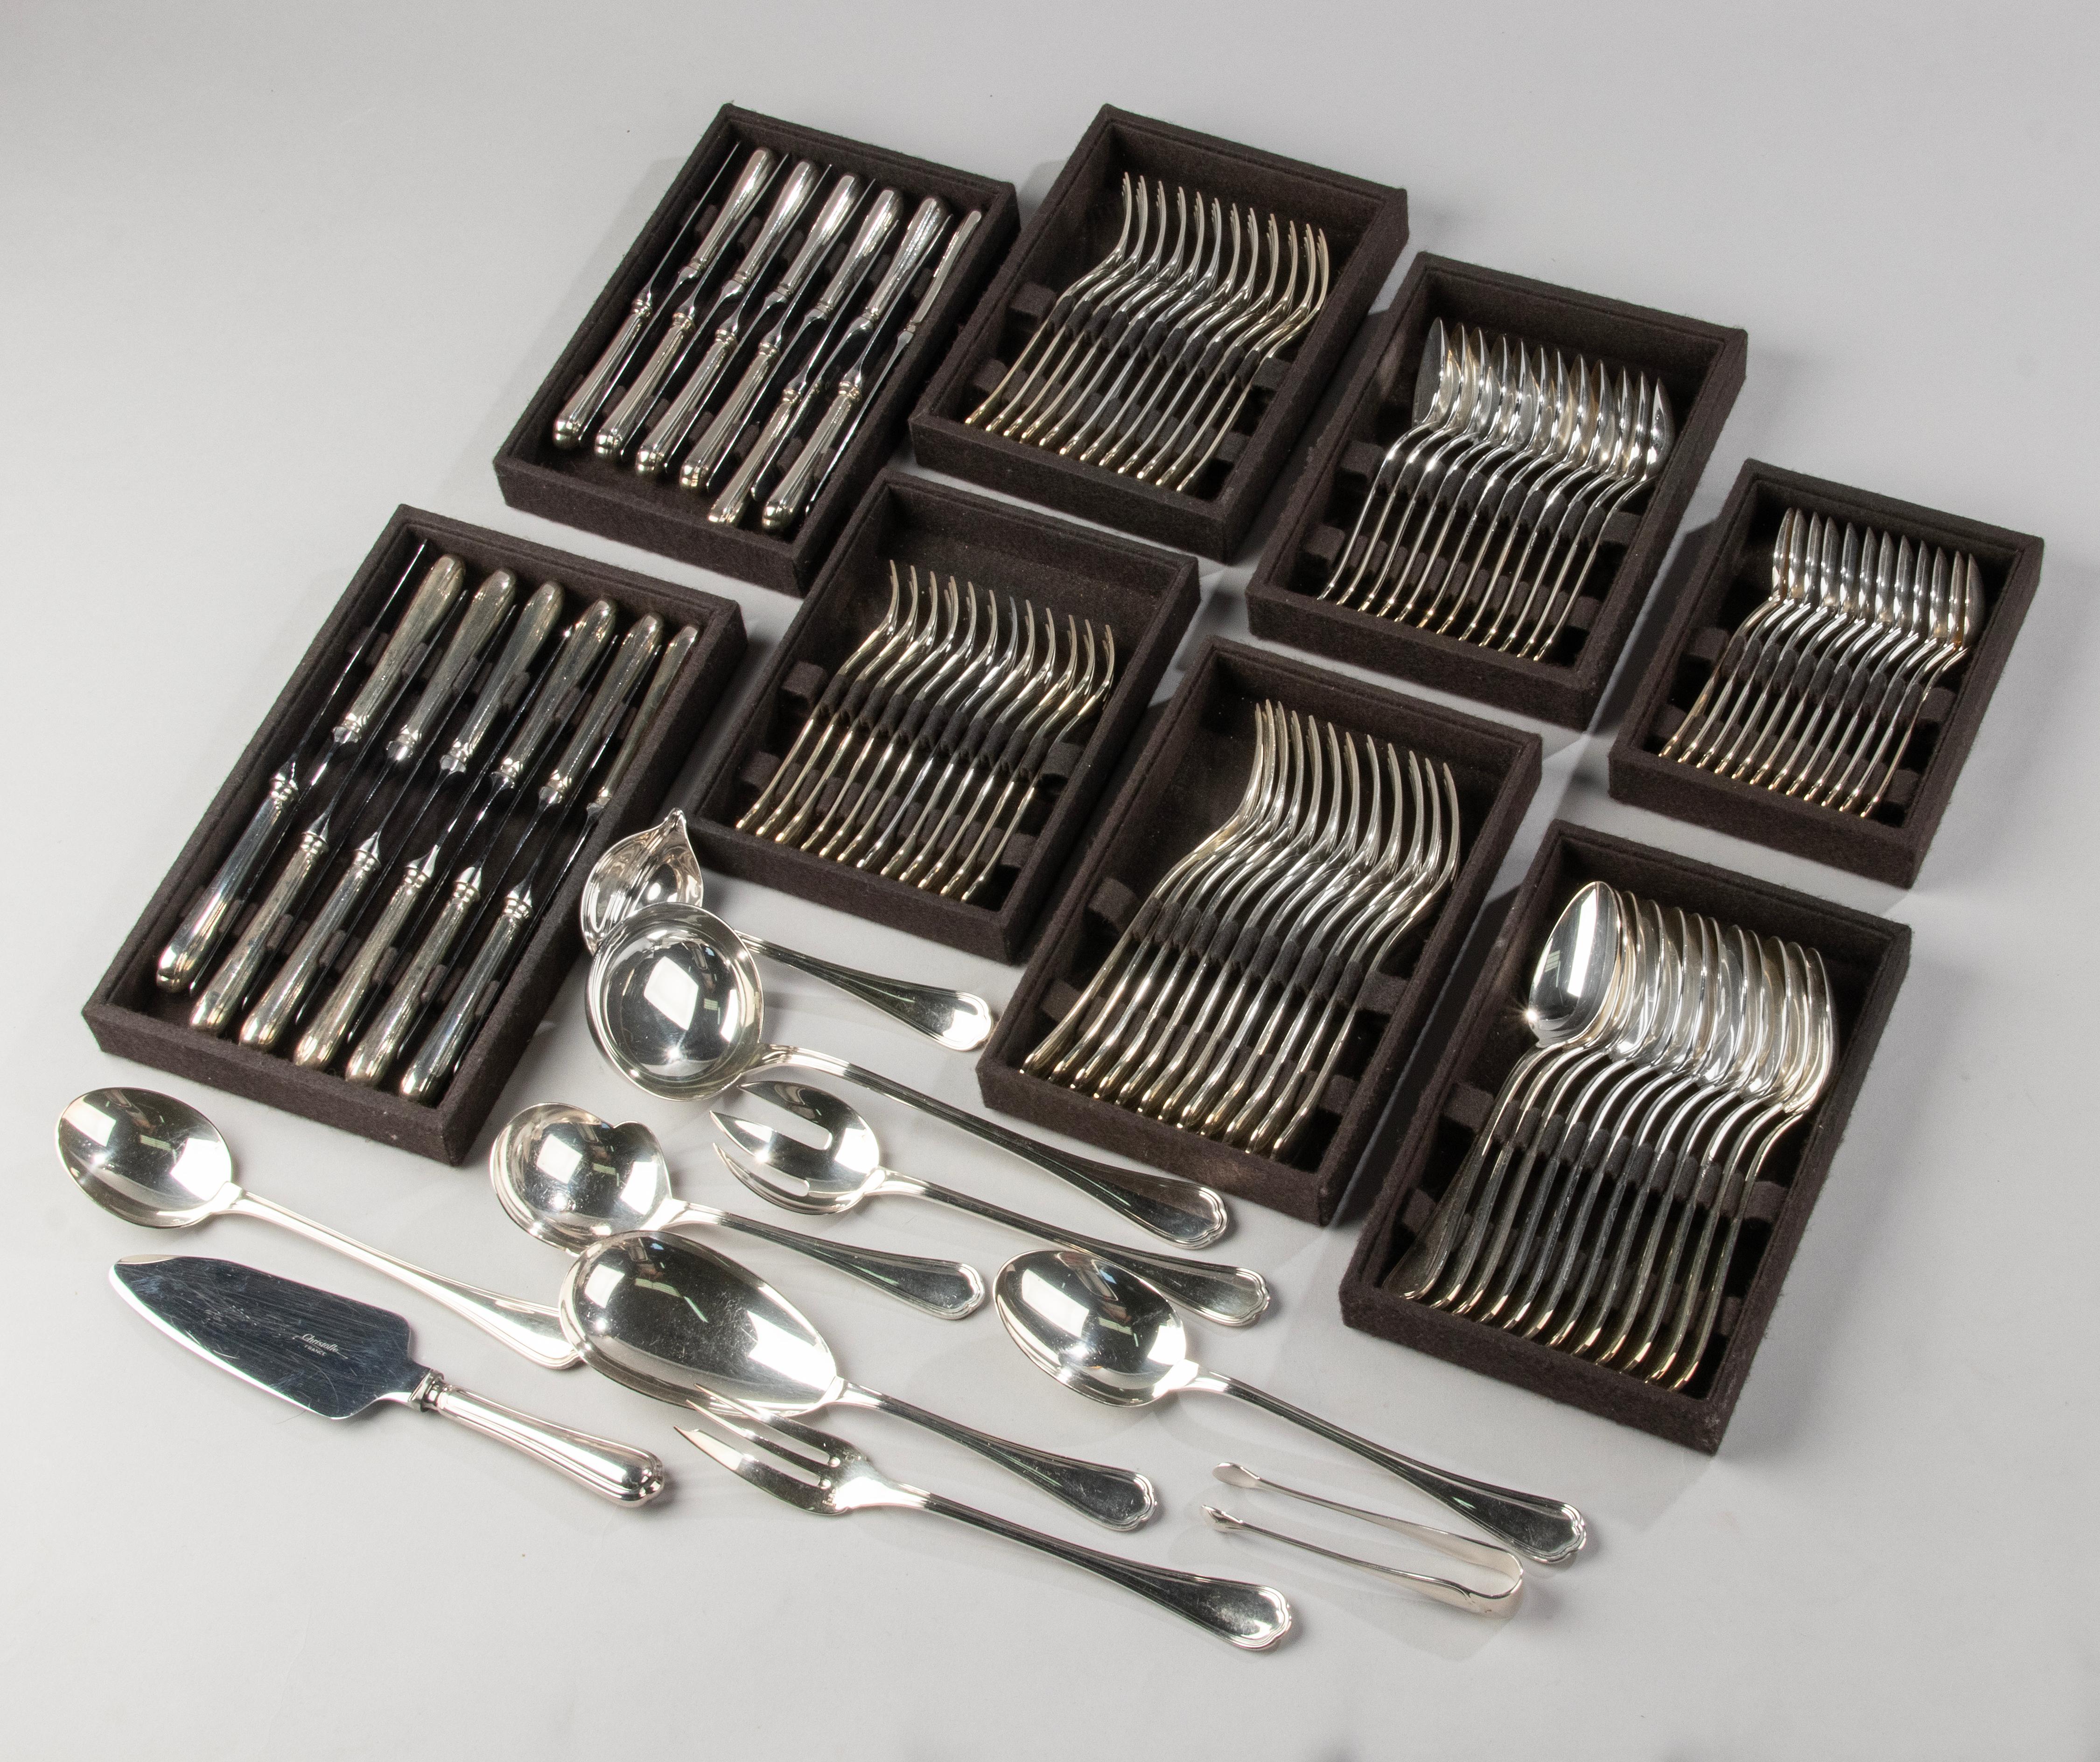 A beautiful set of classic silver plated flatware for 12 persons, made by the French brand Christofle. 
The name of the model is Spatours. 
The set is in great condition, looks like it has hardly been used. Beautiful colour and shine. The set comes